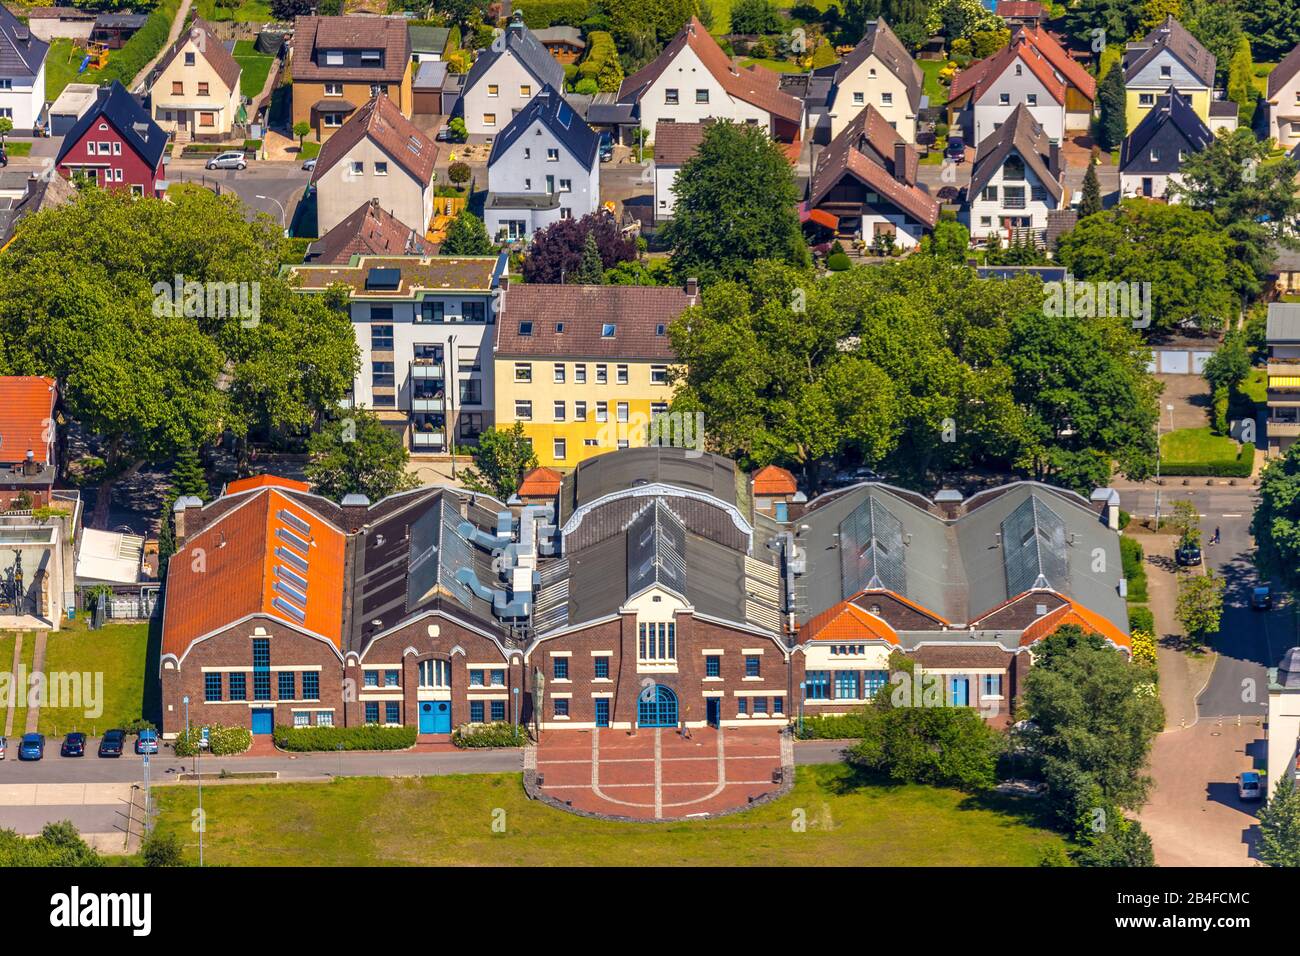 Aerial view of the Flottmann halls, culture and event center, in Herne, Ruhrgebiet, North Rhine-Westphalia, Germany Stock Photo